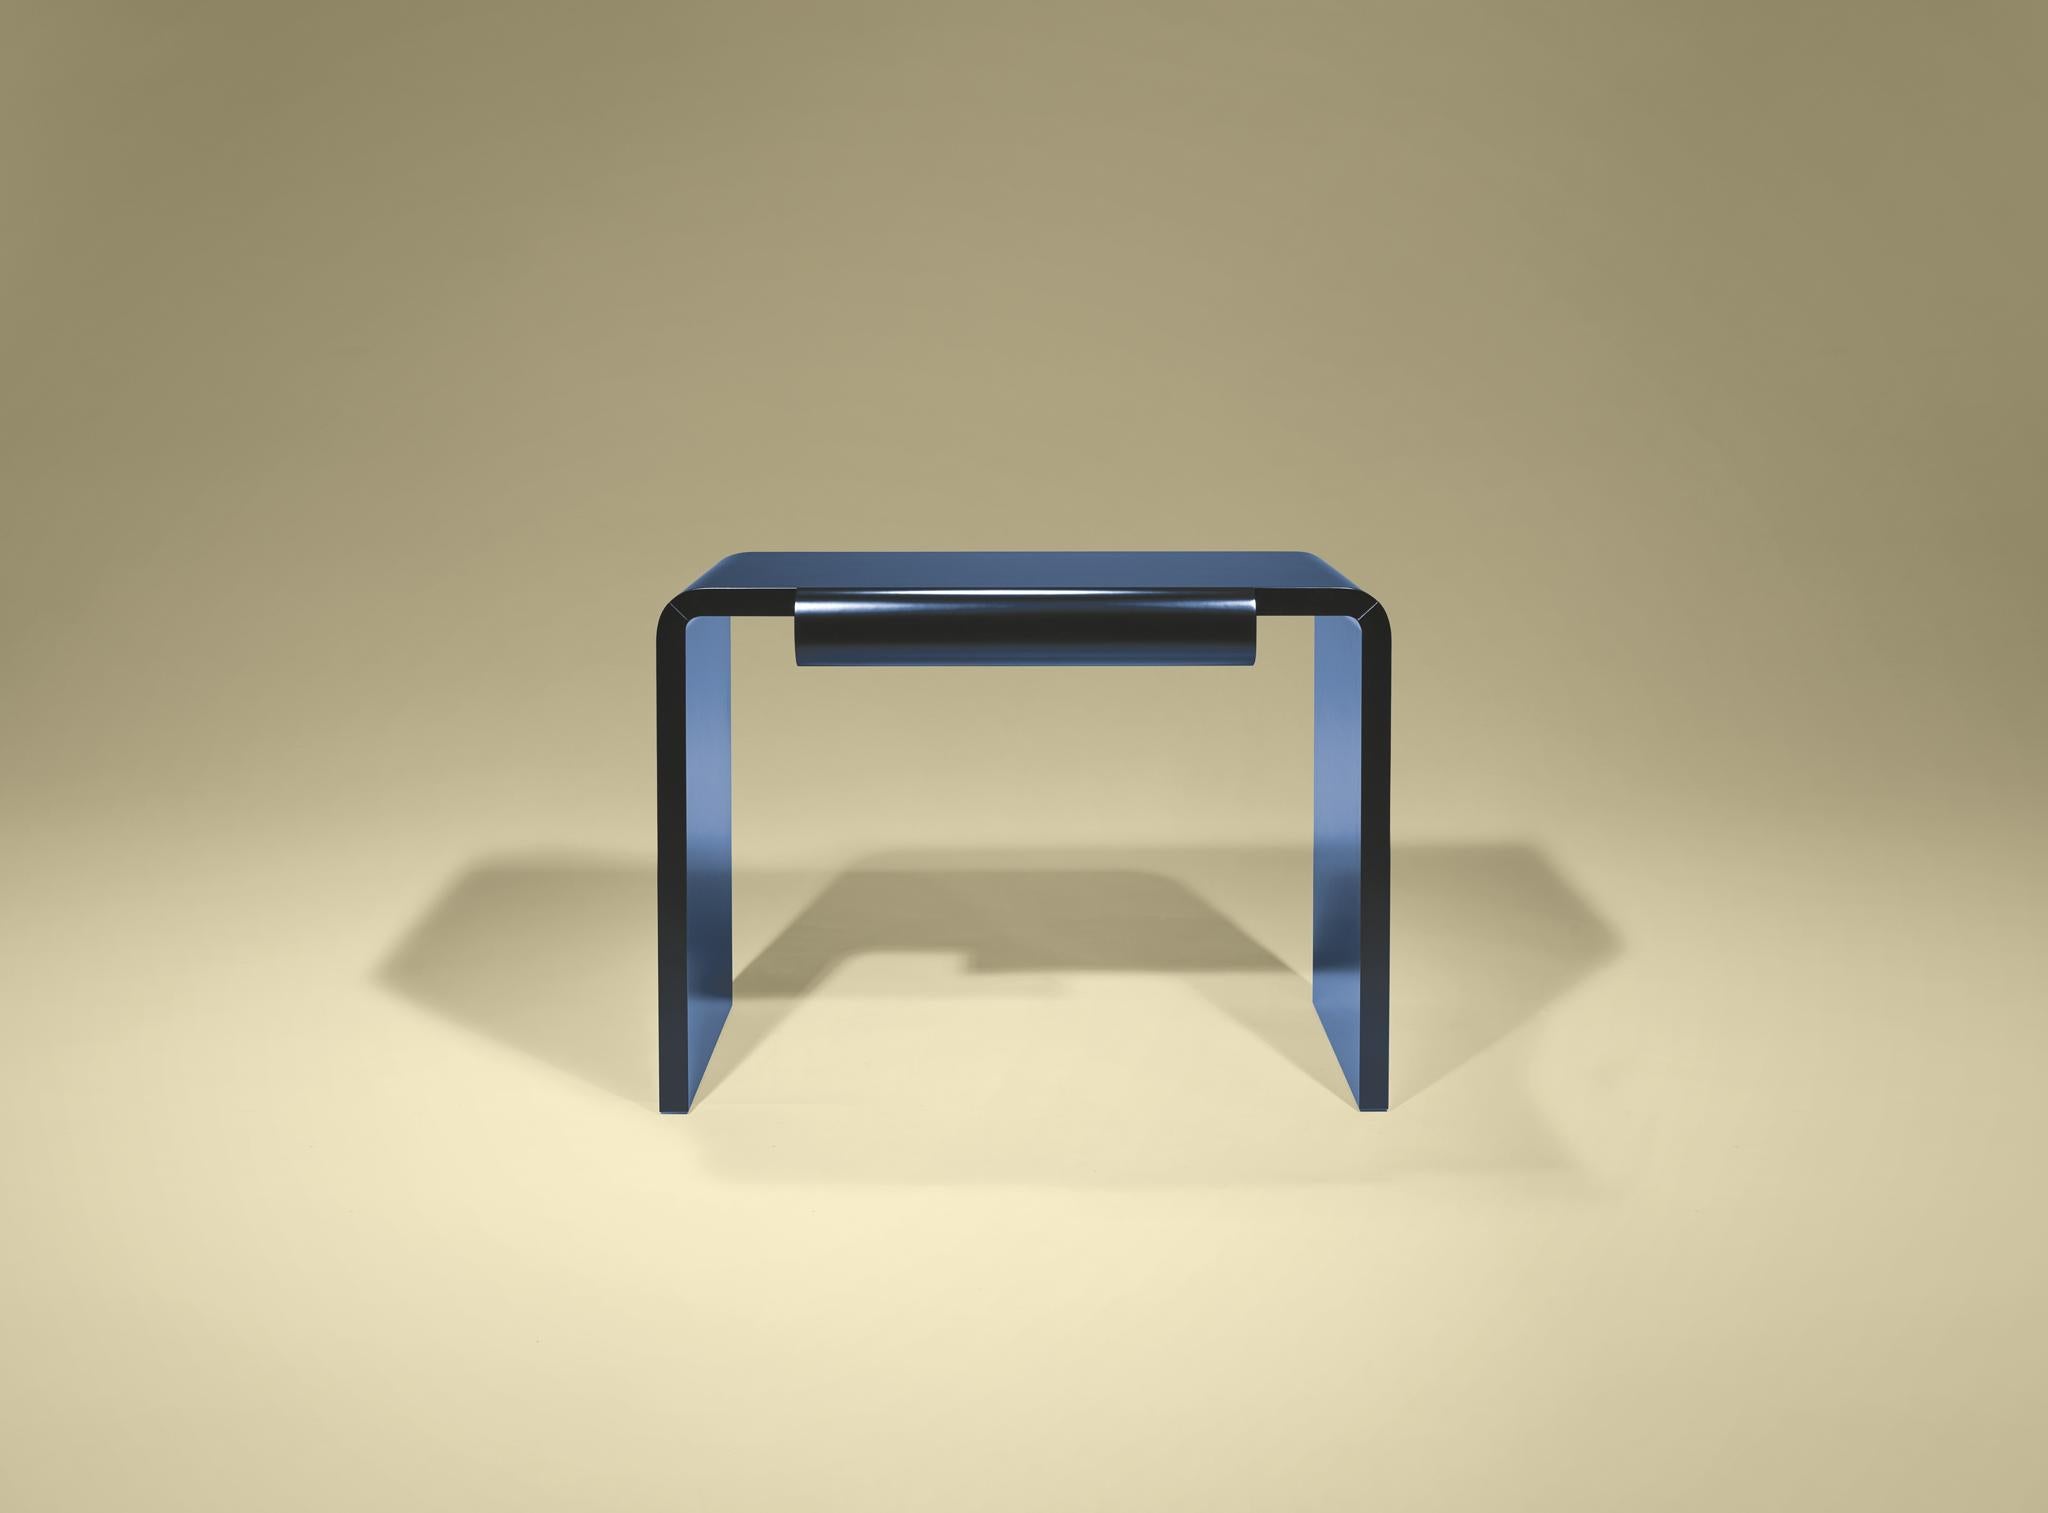 Console table in blue lacquer with one drawer.

Bespoke / customizable
Identical shapes with different sizes and finishings.
All RAL colors available. (Mate / half gloss / gloss).